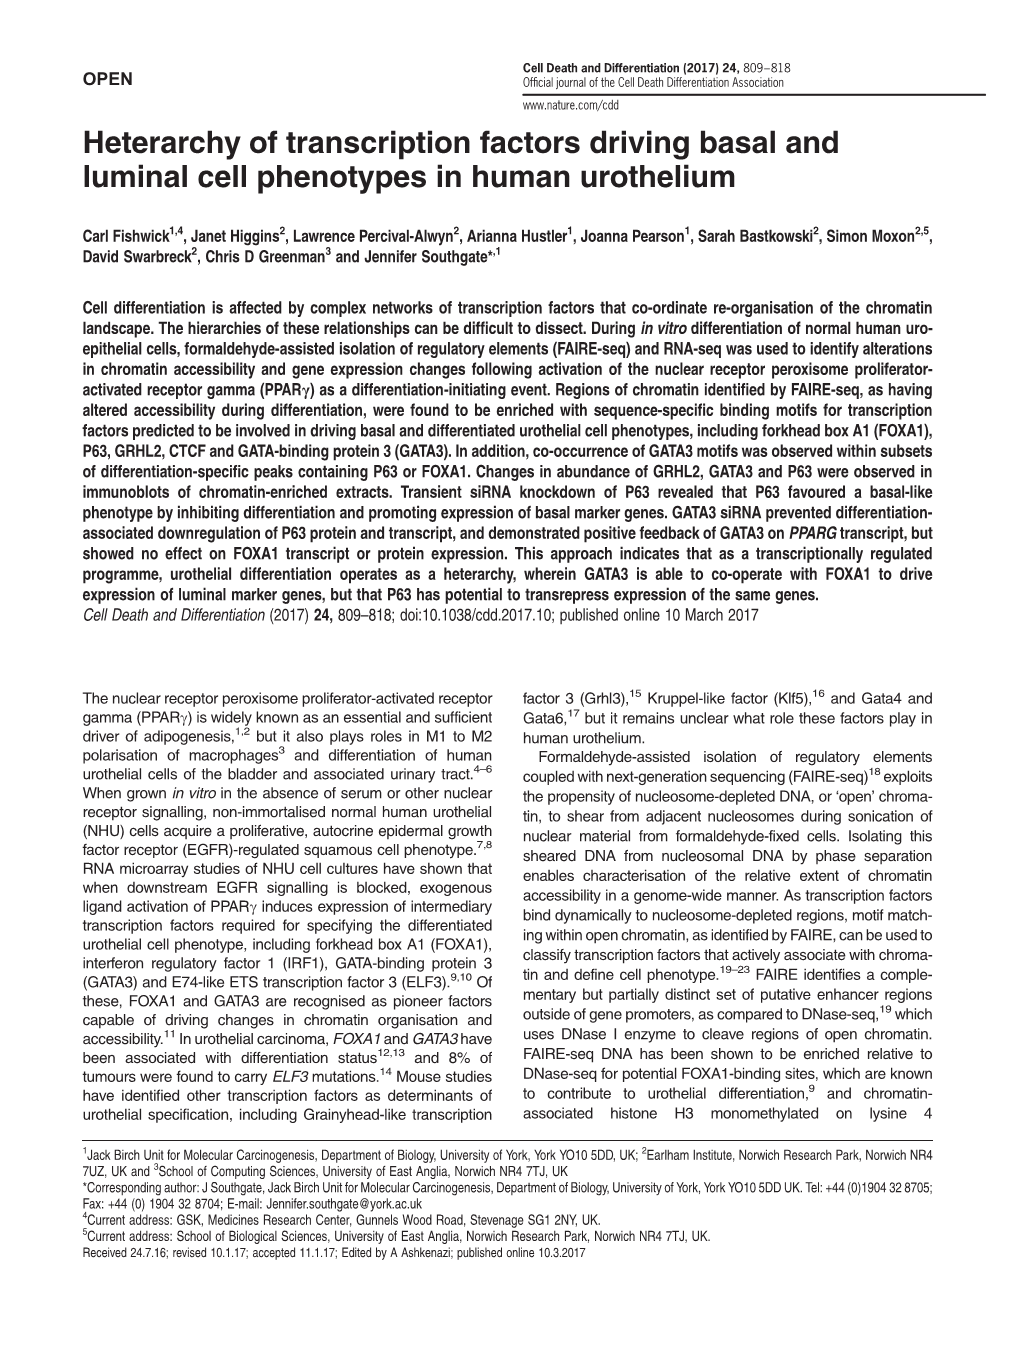 Heterarchy of Transcription Factors Driving Basal and Luminal Cell Phenotypes in Human Urothelium